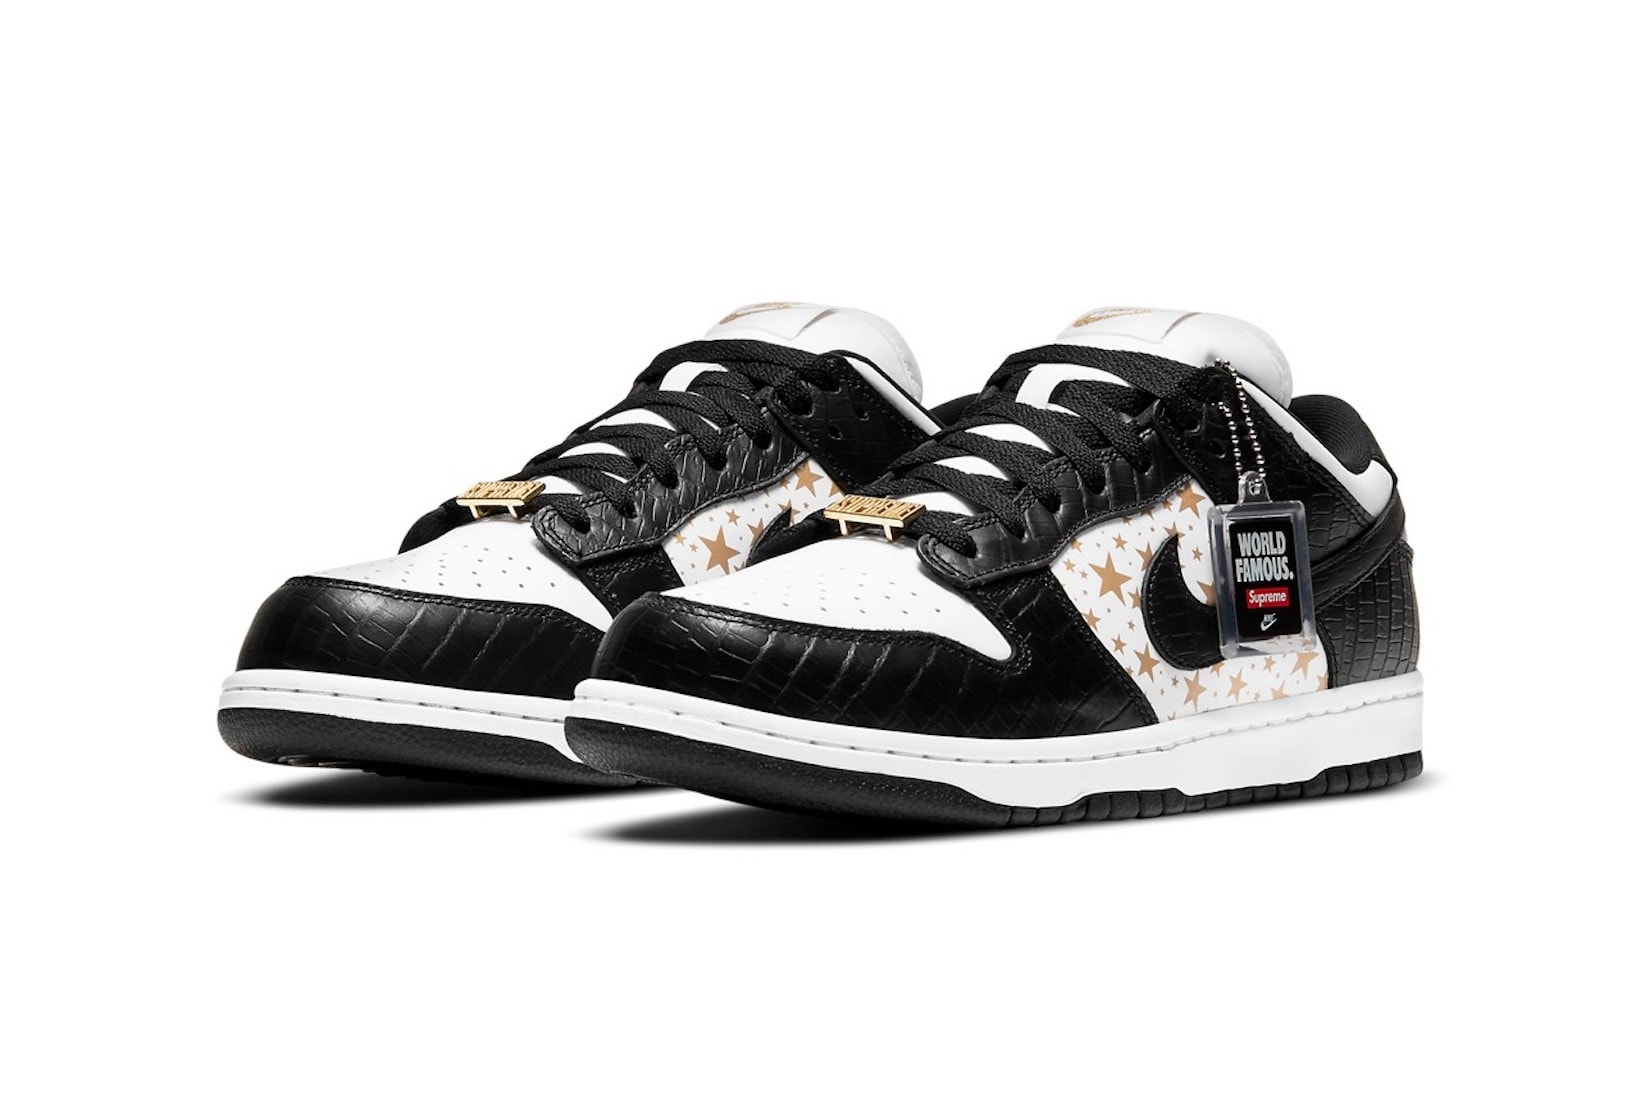 supreme nike sb dunk low collaboration sneakers black white colorway gold stars laces logos tag